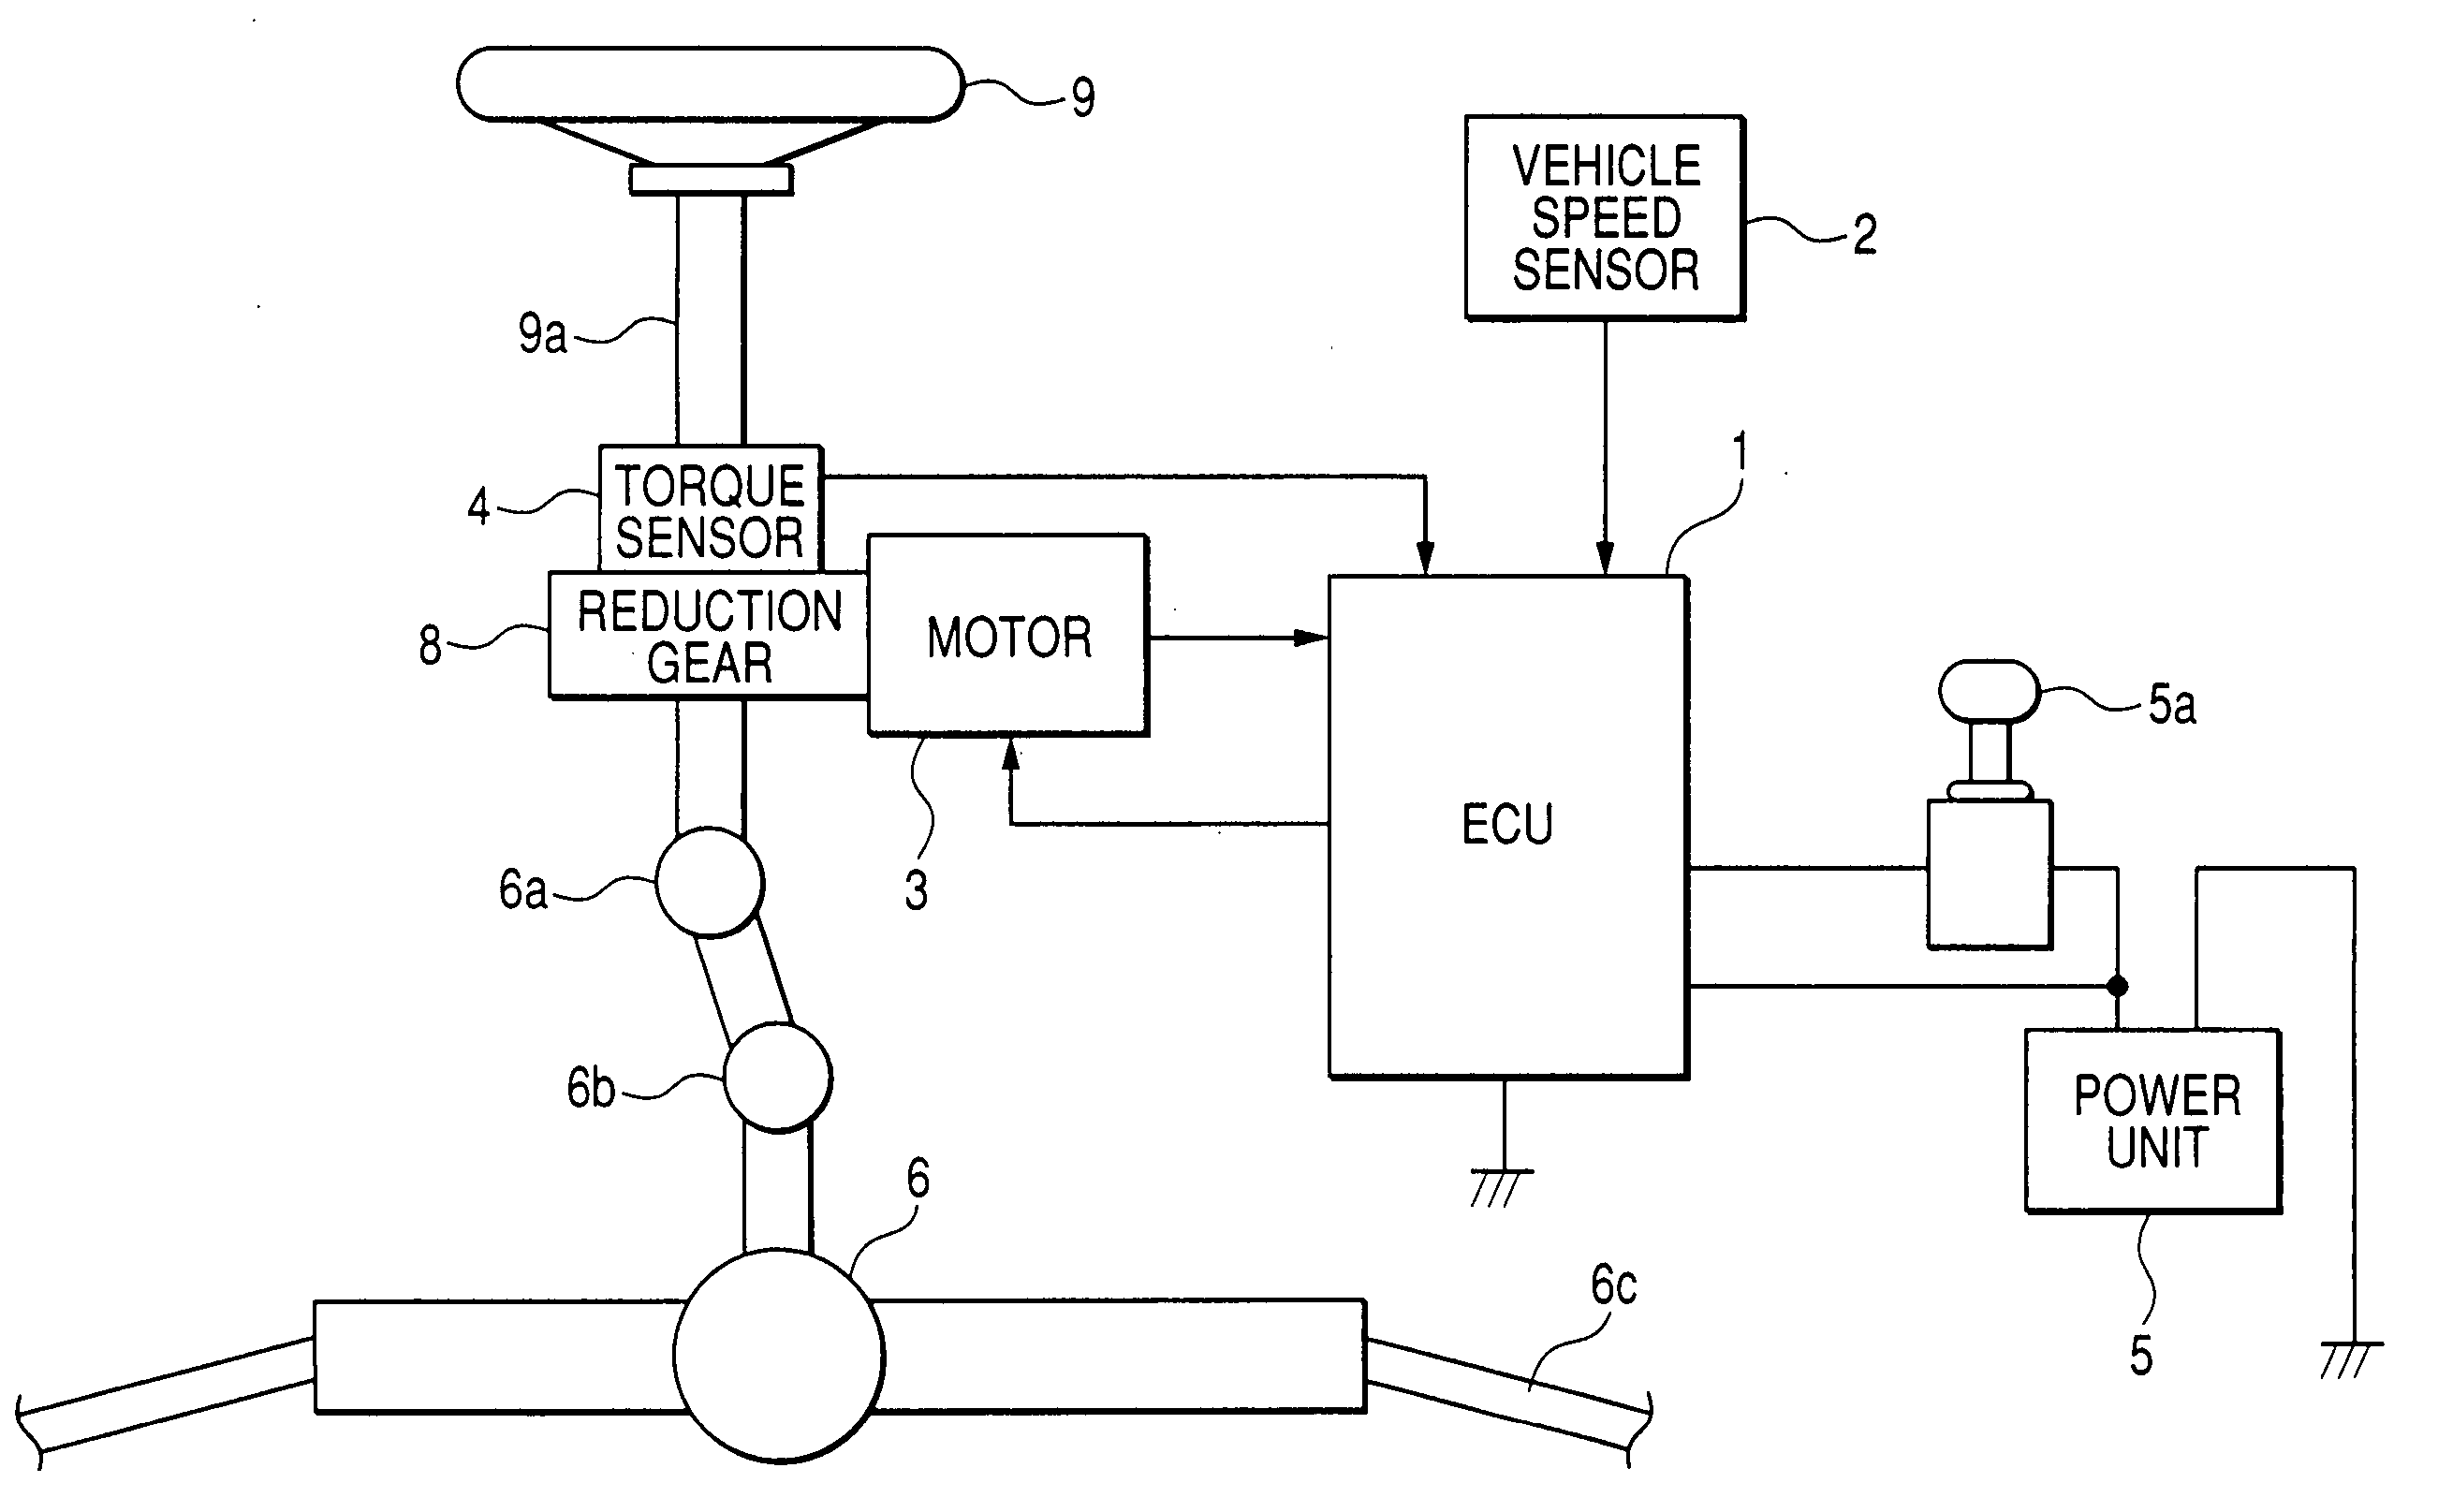 Power steering control device for monitoring reference voltage